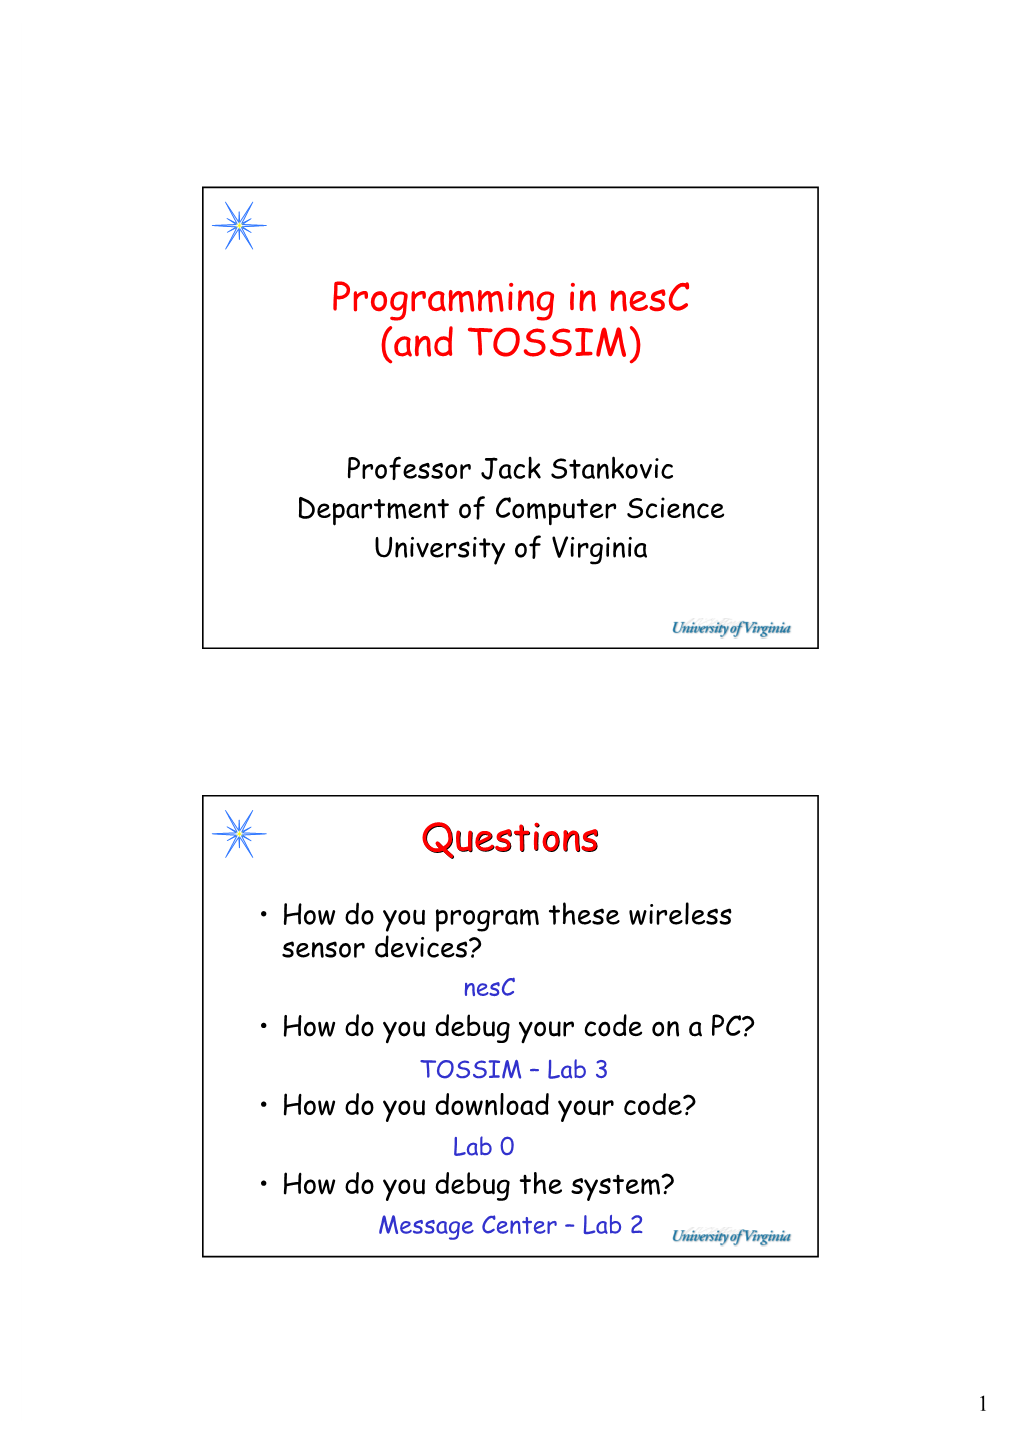 Programming in Nesc (And TOSSIM) Questions